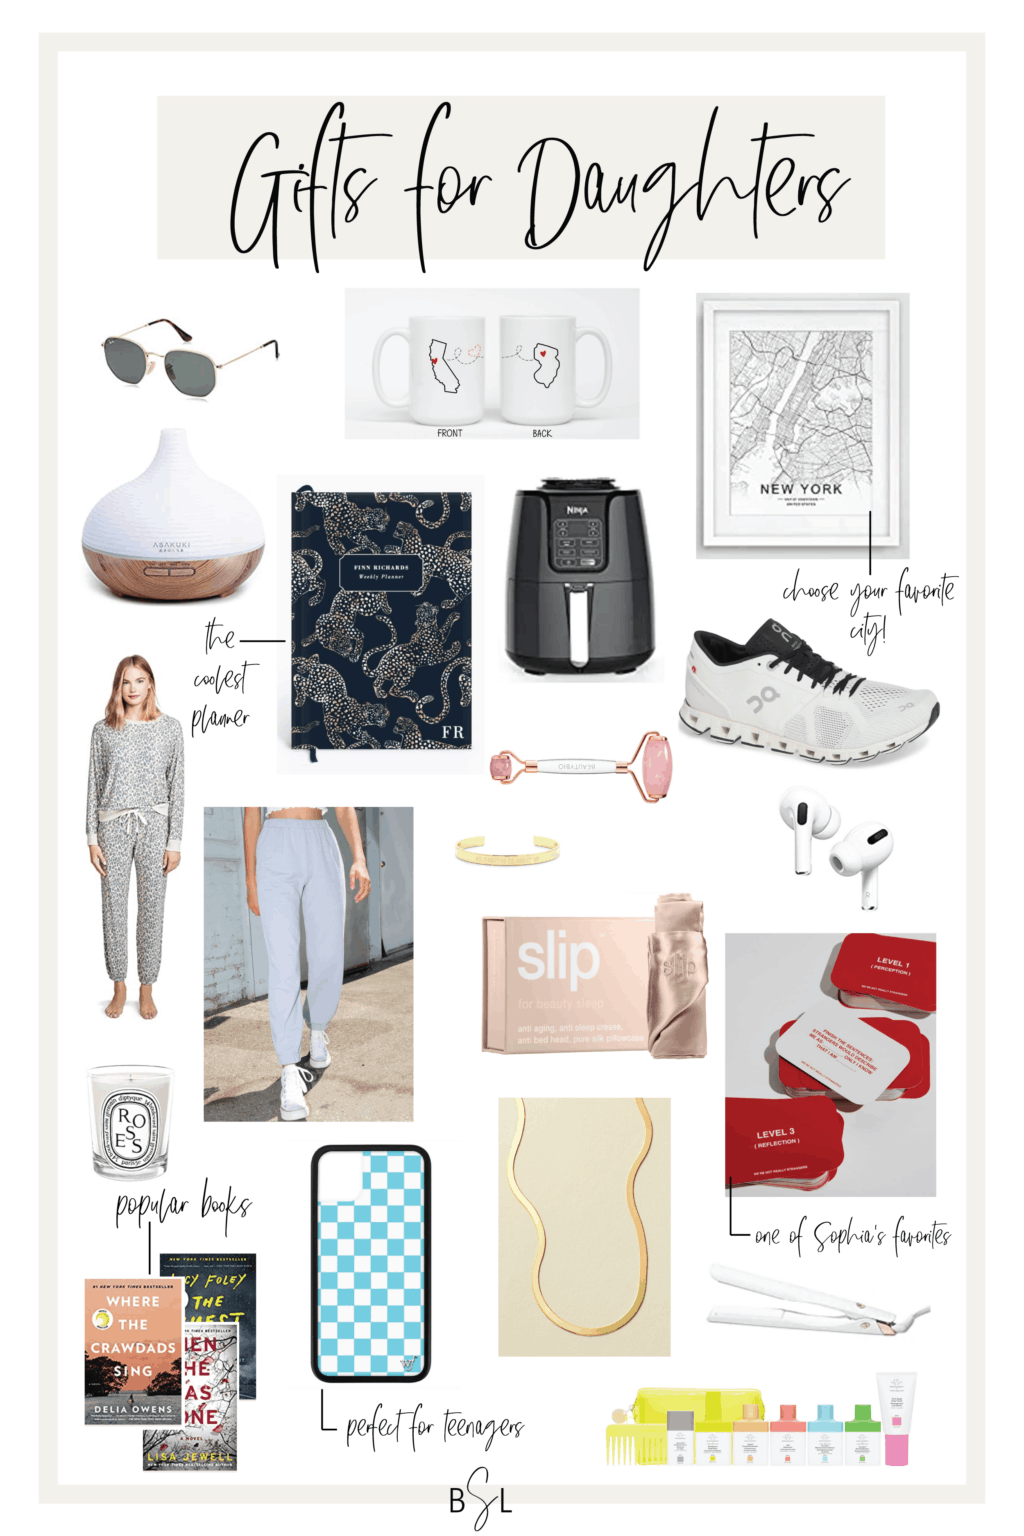 43 Christmas Gifts for Daughter That She Will Obsess Over By Sophia Lee